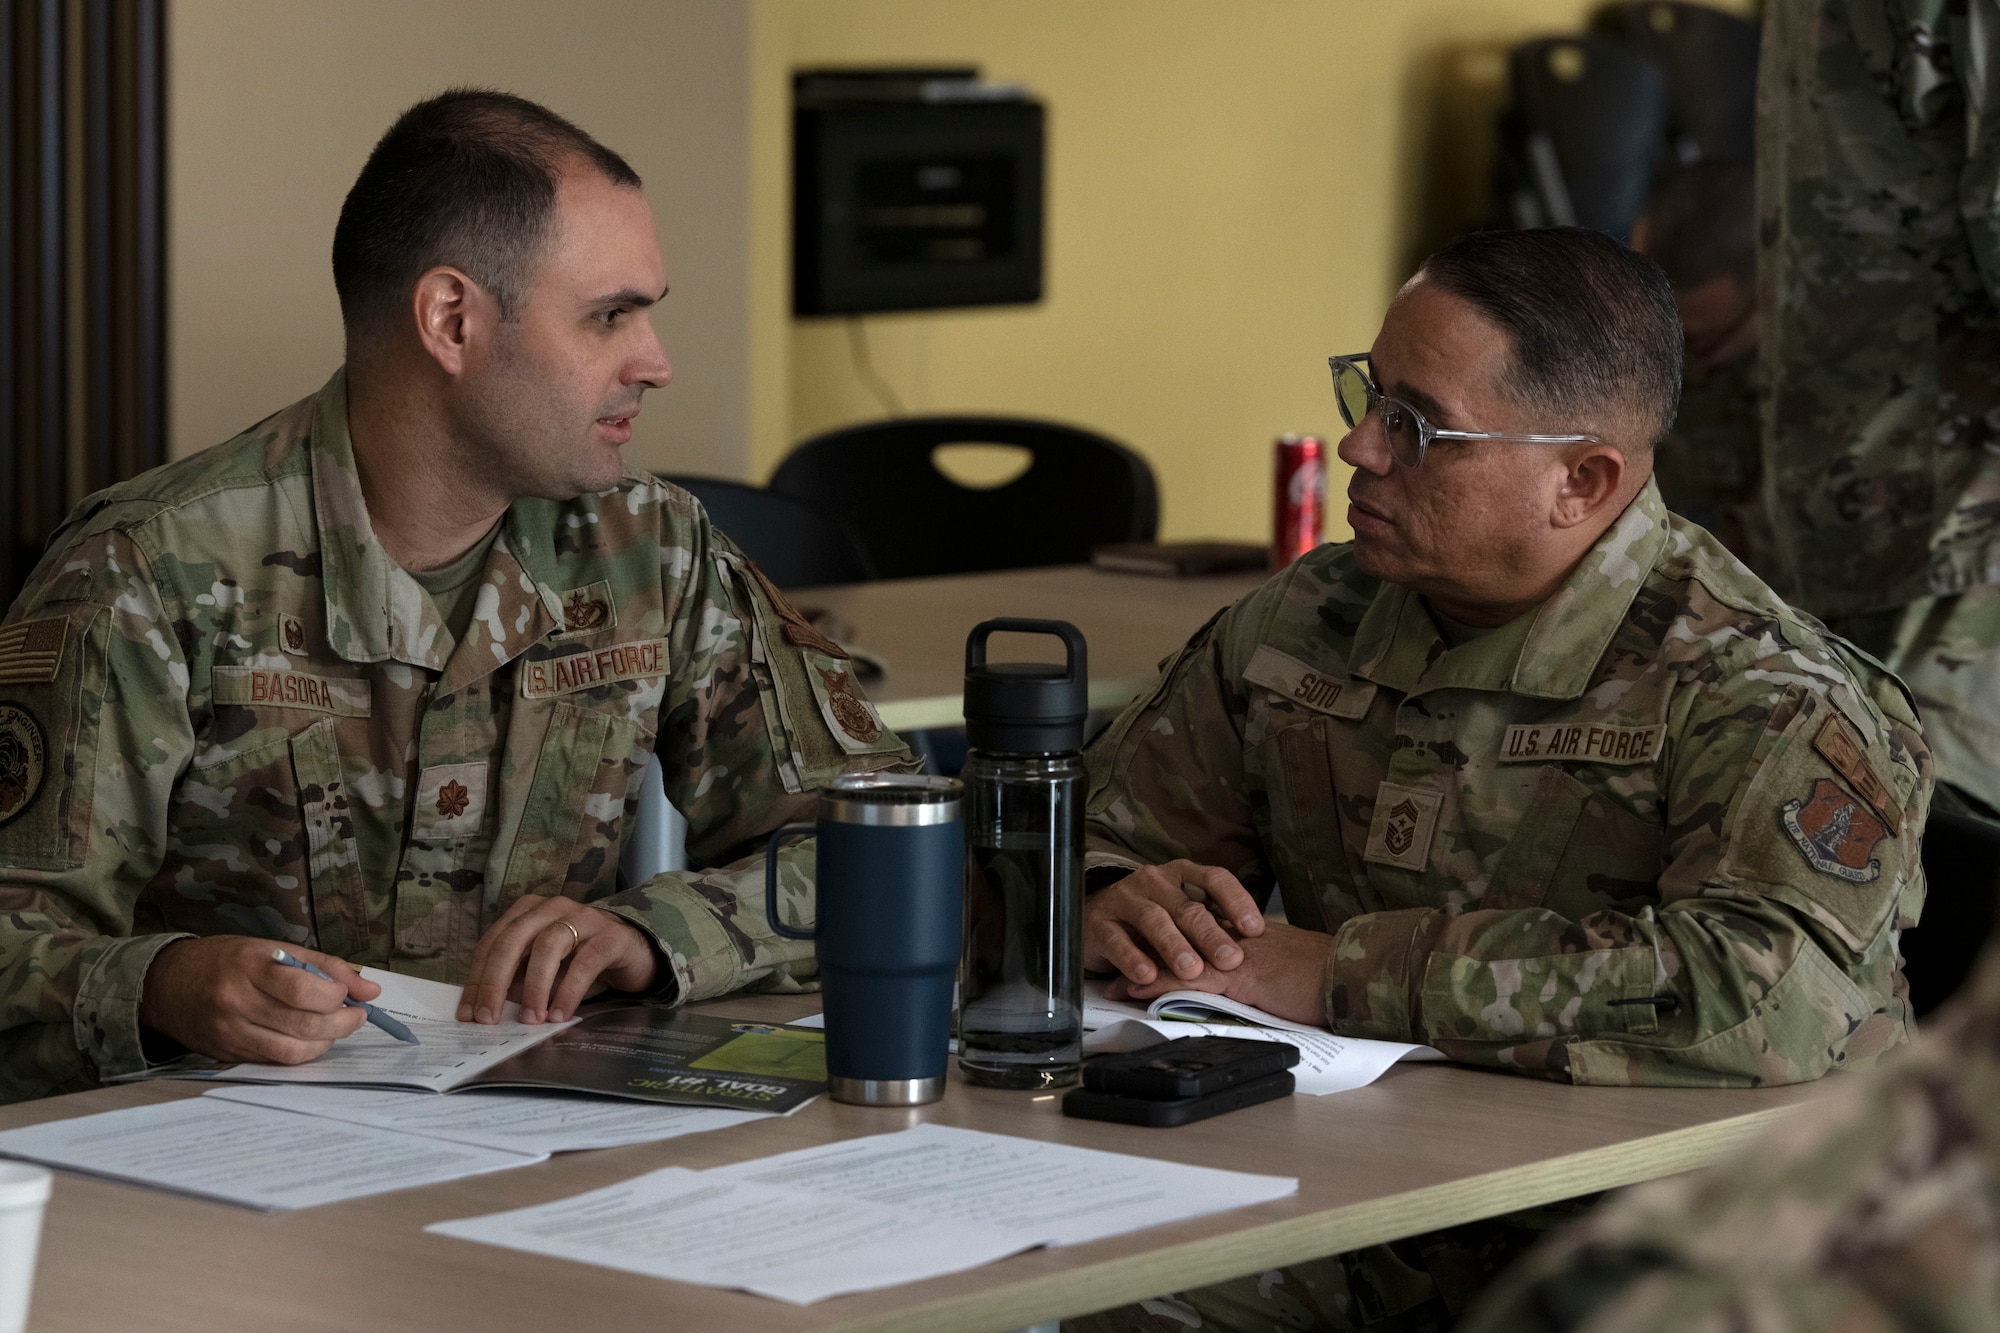 U.S. Air Force Maj. Ricardo Basora Rovira, the 156th Civil Engineering Squadron commander, and Chief Master Sgt. Orlando Soto, the 156th Wing command chief, interact during the Unit Leadership Workshop, at Muñiz Air National Guard Base, Carolina, Puerto Rico, Jan. 25, 2024. The one-day course, developed by the National Guard Bureau Inspector General's office, seeked to address deficiencies identified in unit self-assessment programs and promoted continuous process improvement. (U.S. Air National Guard photo by Airman 1st Class Sharymel Montalvo Velez)